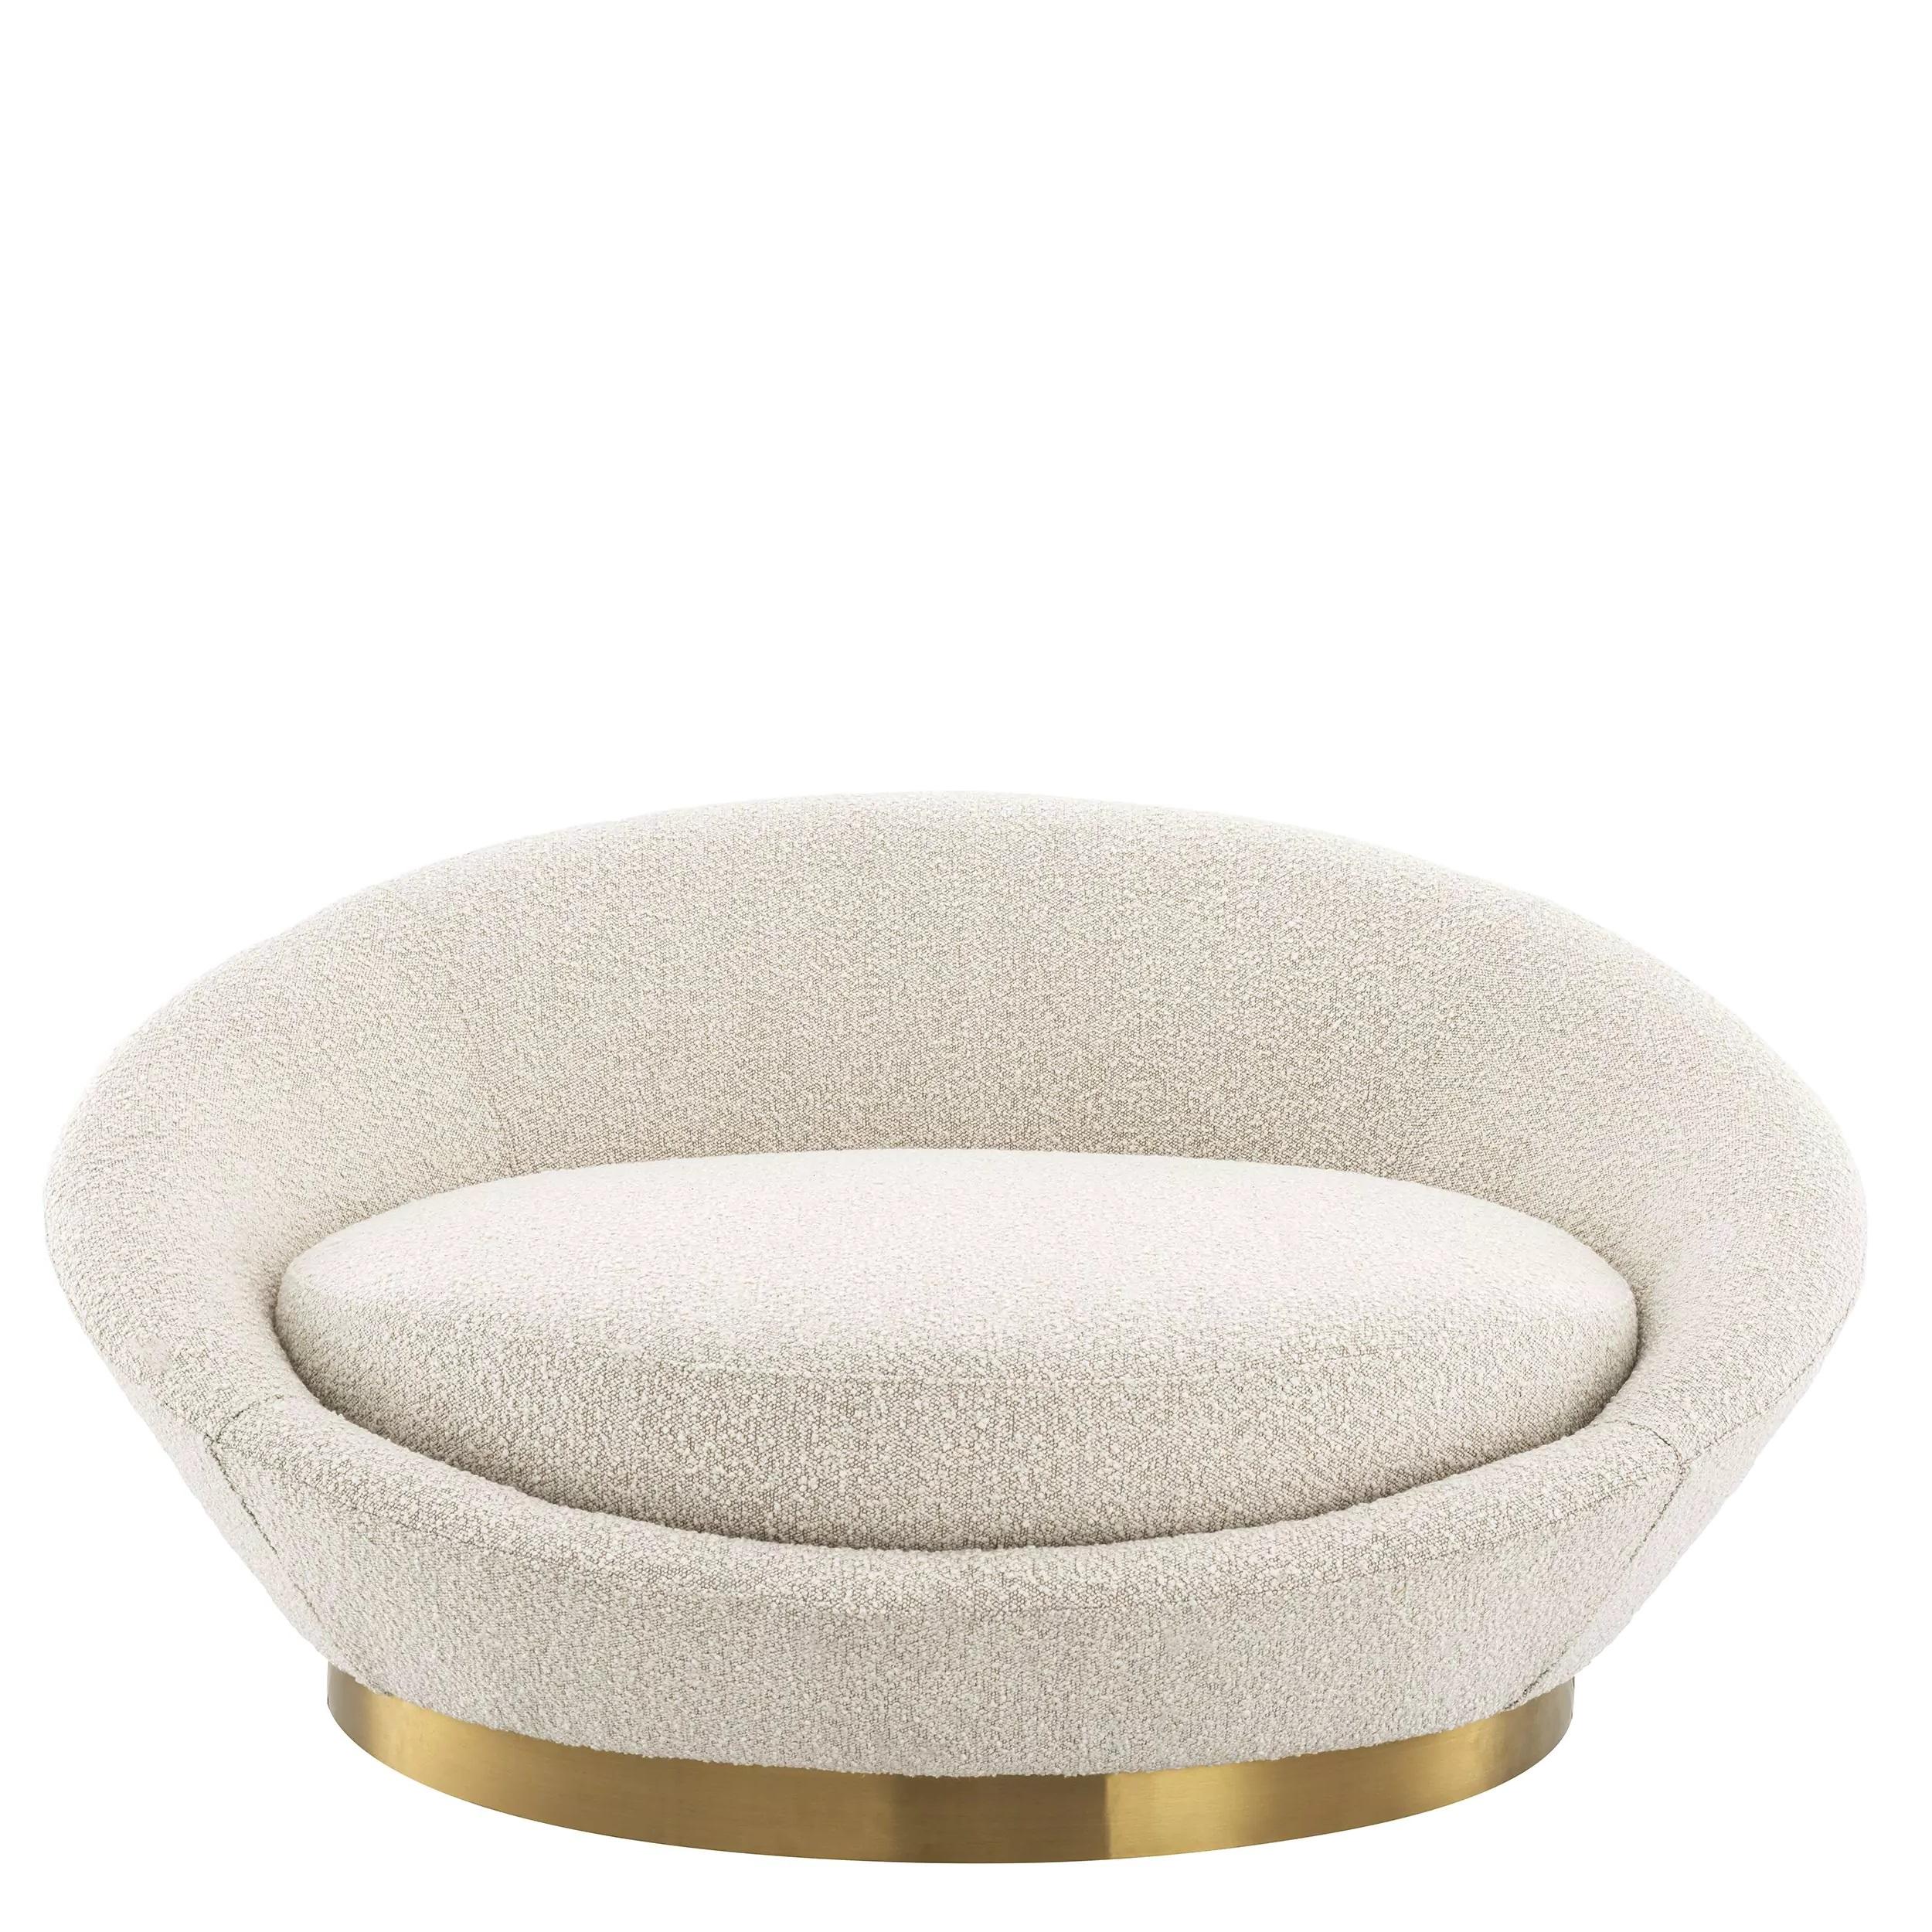 1970s Design style welcoming and round shaped large armchair or sofa in bouclé fabric and brass finishes base.